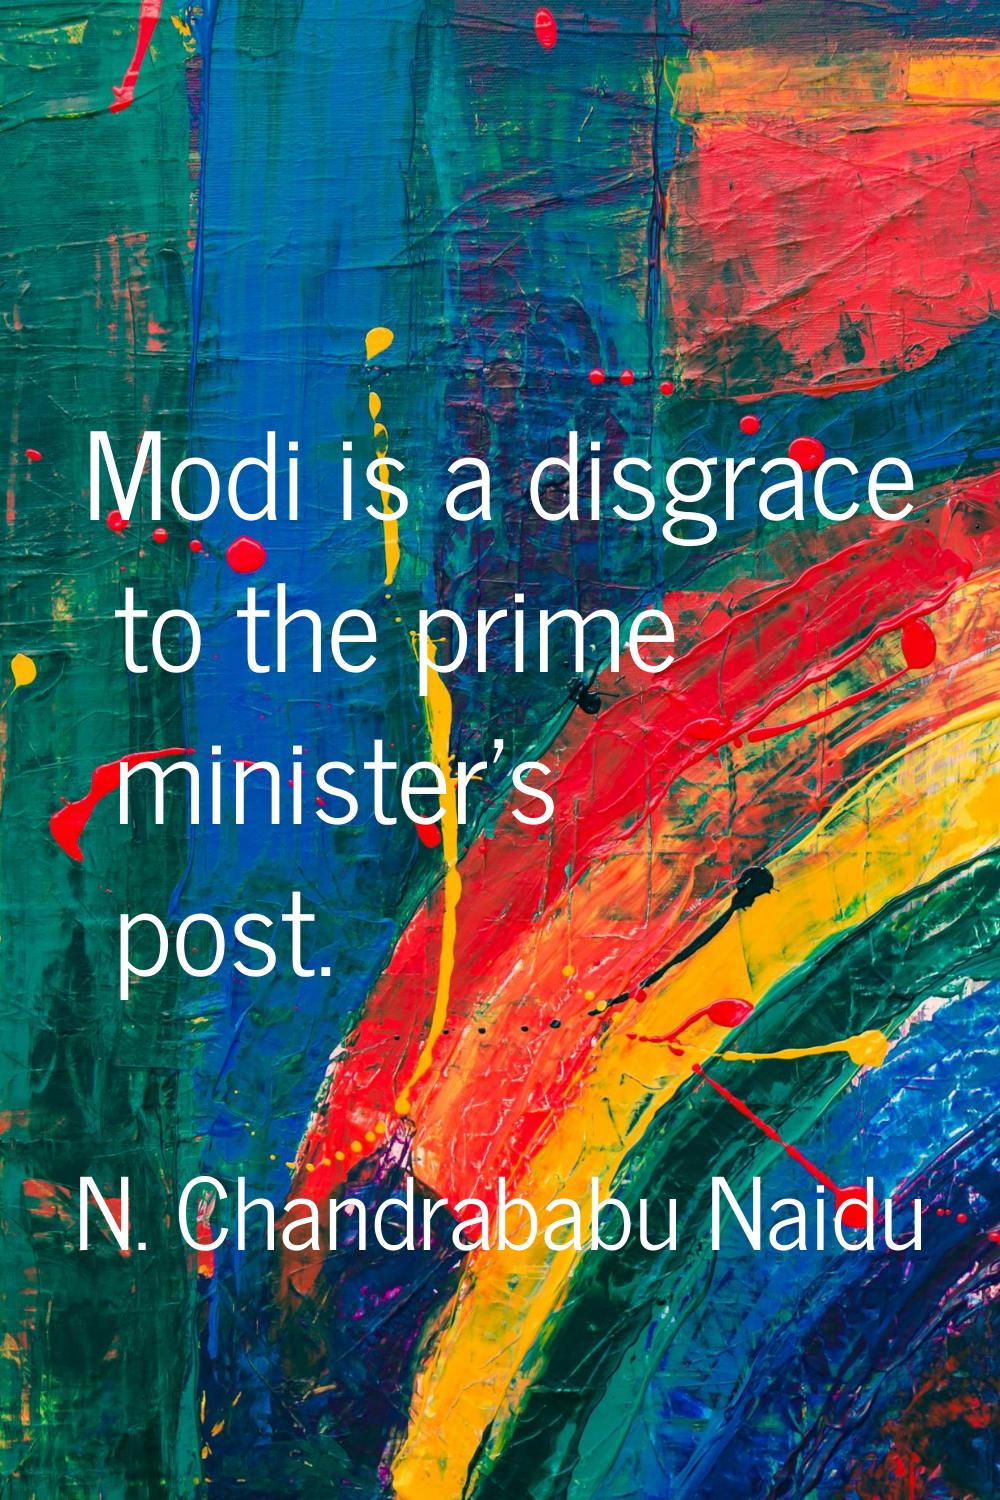 Modi is a disgrace to the prime minister's post.